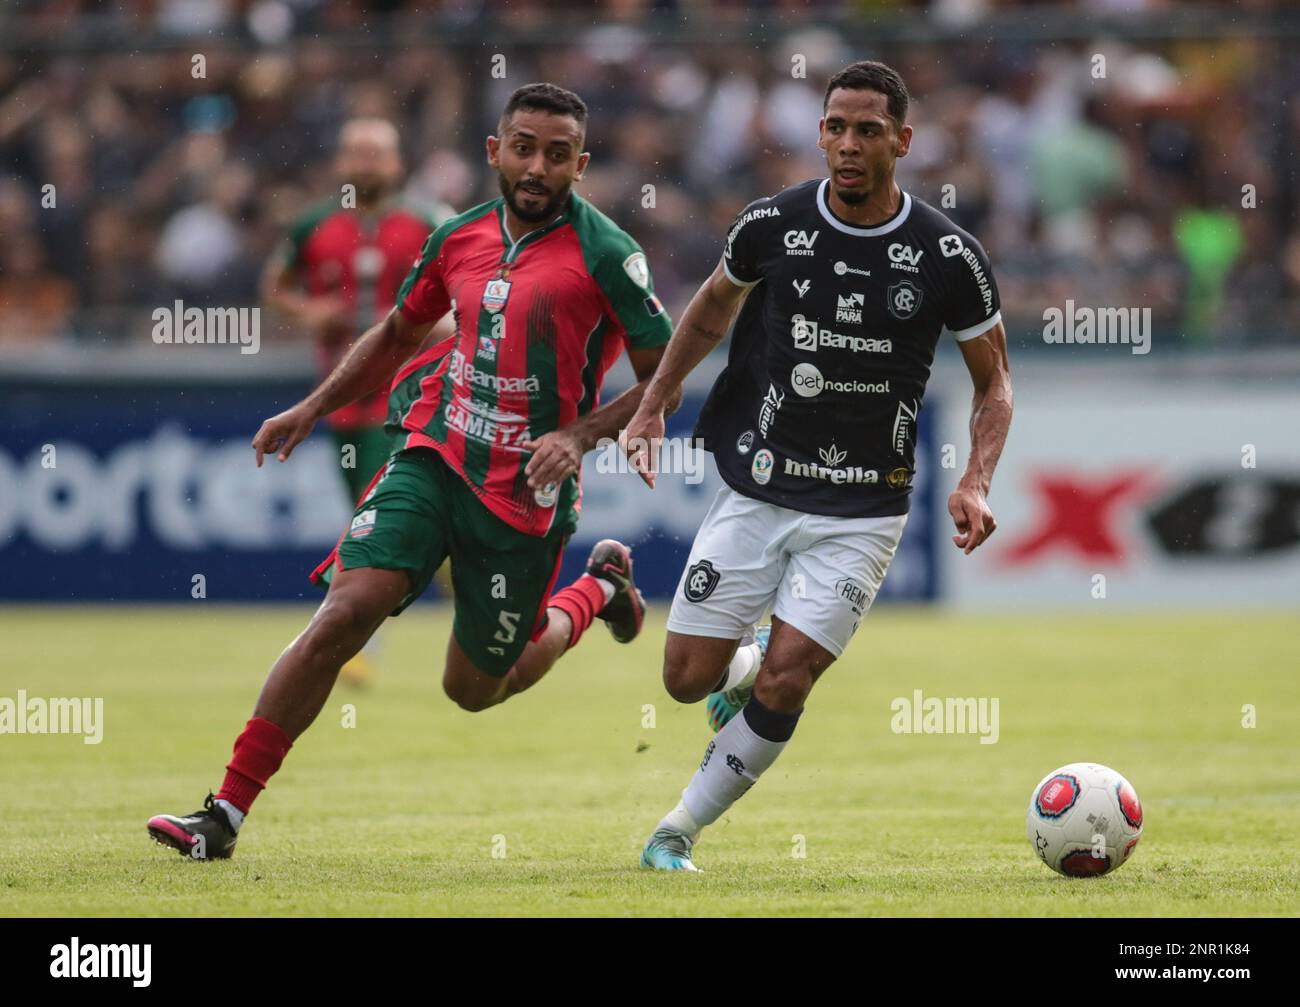 Belem, Brazil. 26th Feb, 2023. PA - Belem - 02/26/2023 - PARAENSE 2023, REMO X CAMETA - Pedro Vitor player of Remo during a match against Cameta at Baenao stadium for the Paraense 2023 championship. Photo: Fernando Torres/AGIF/Sipa USA Credit: Sipa USA/Alamy Live News Stock Photo